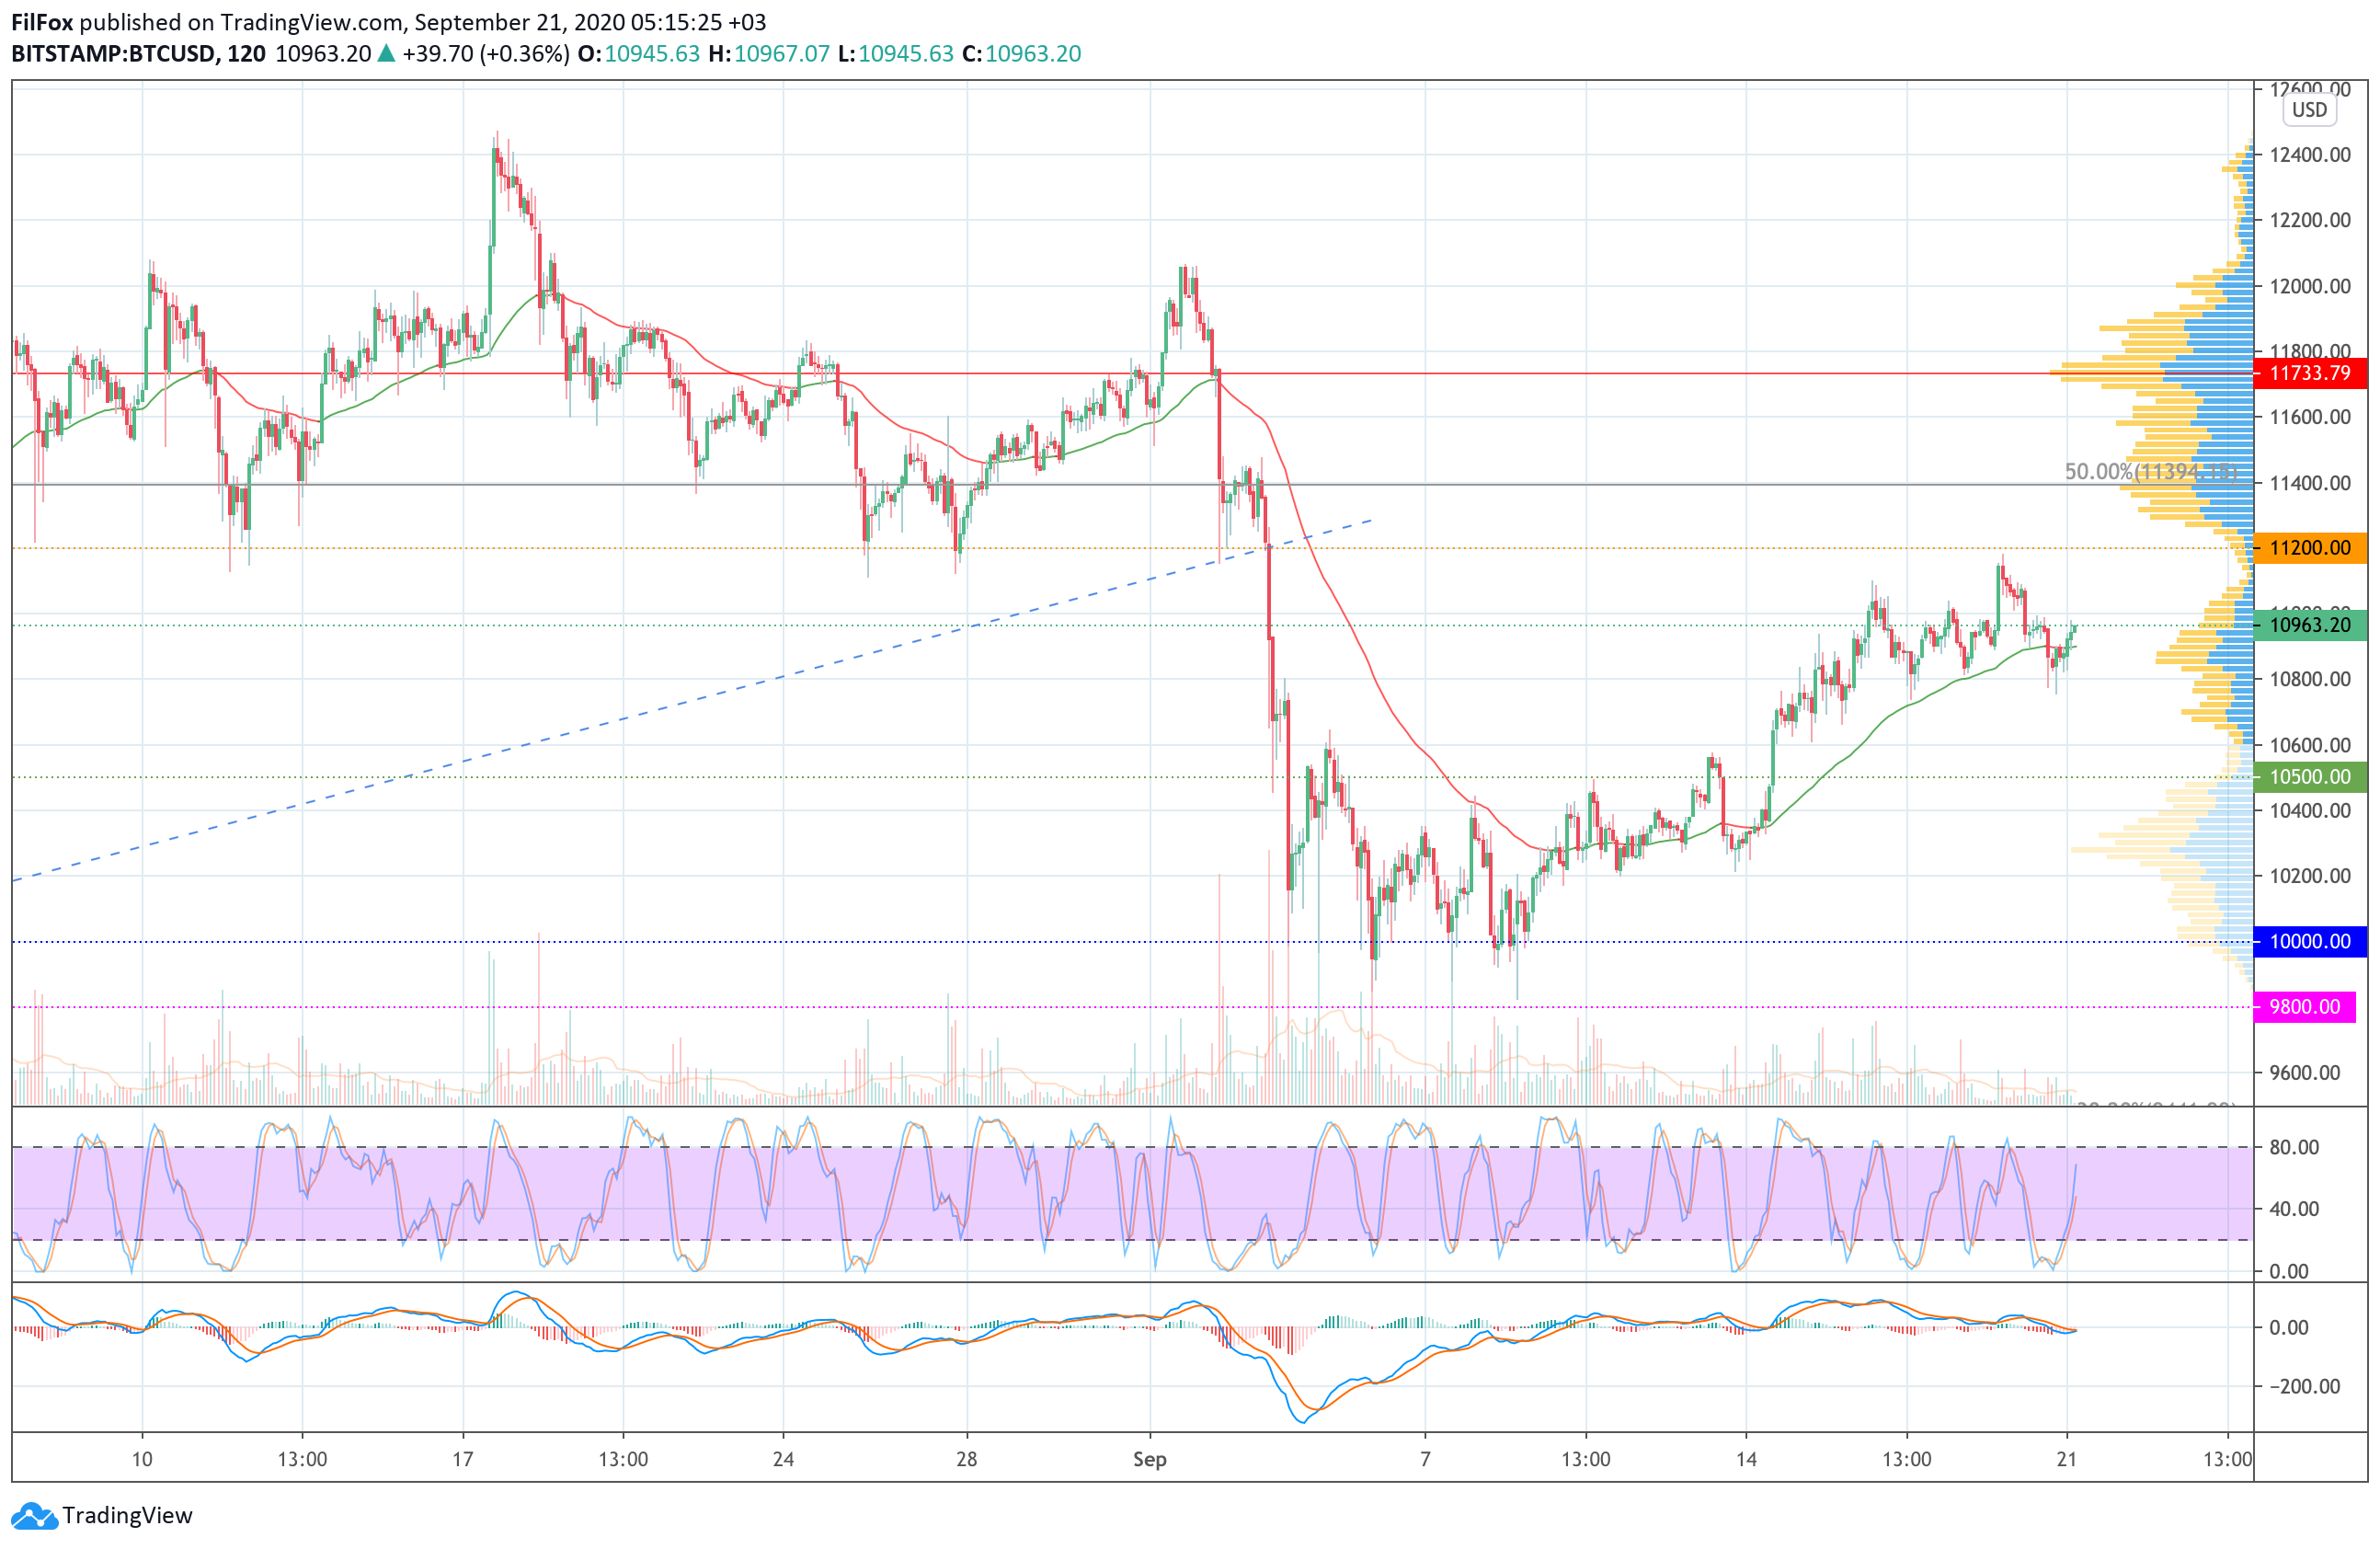 Analysis of prices for Bitcoin, Ethereum, XRP for 09/21/2020